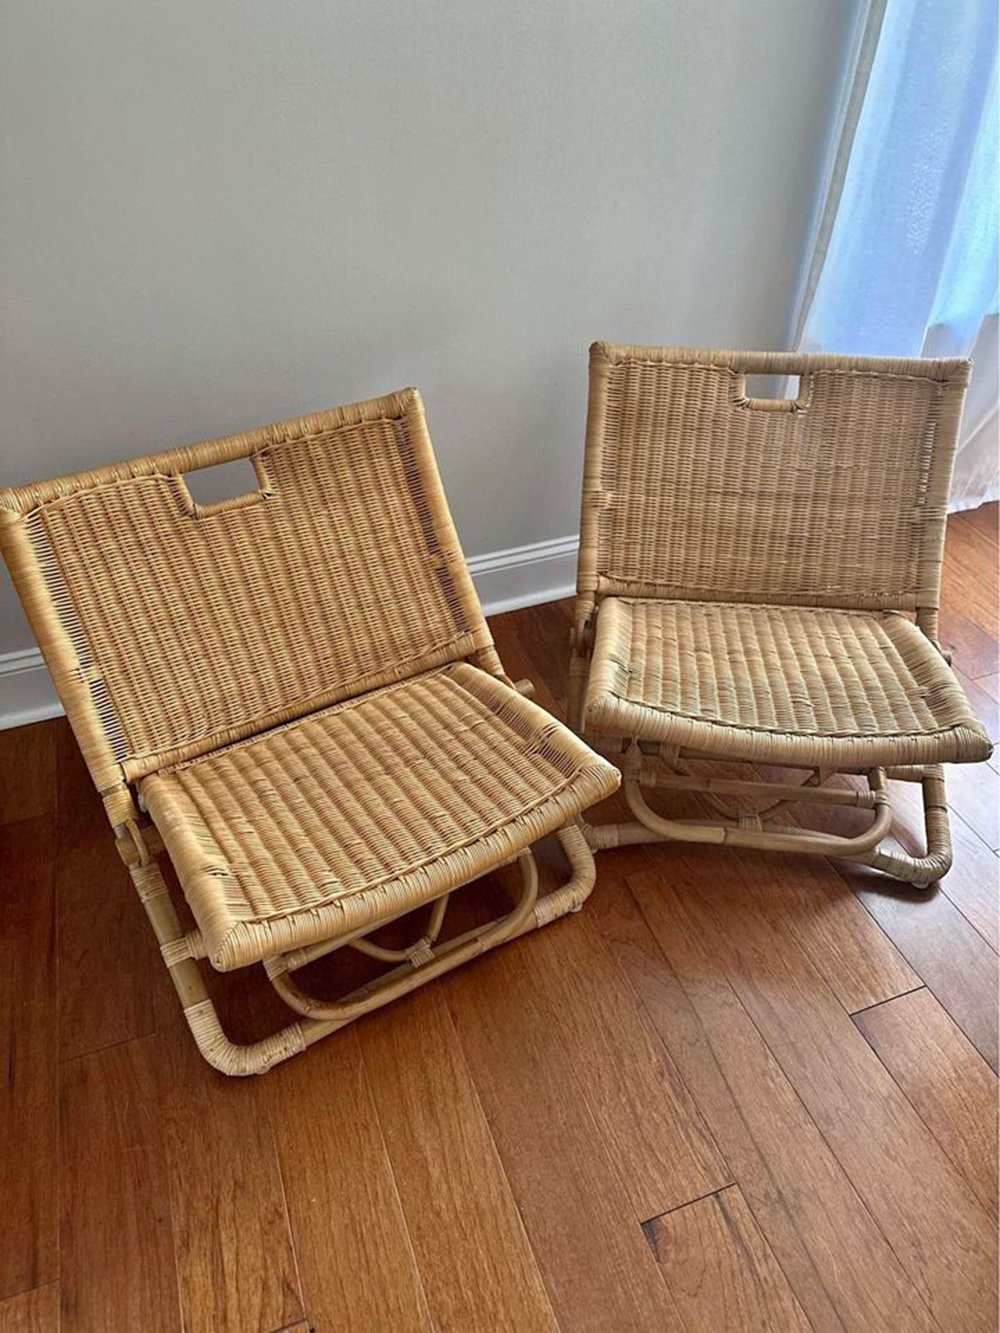 Facebook Marketplace Finds : Charleston, SC - roomfortuesday.com